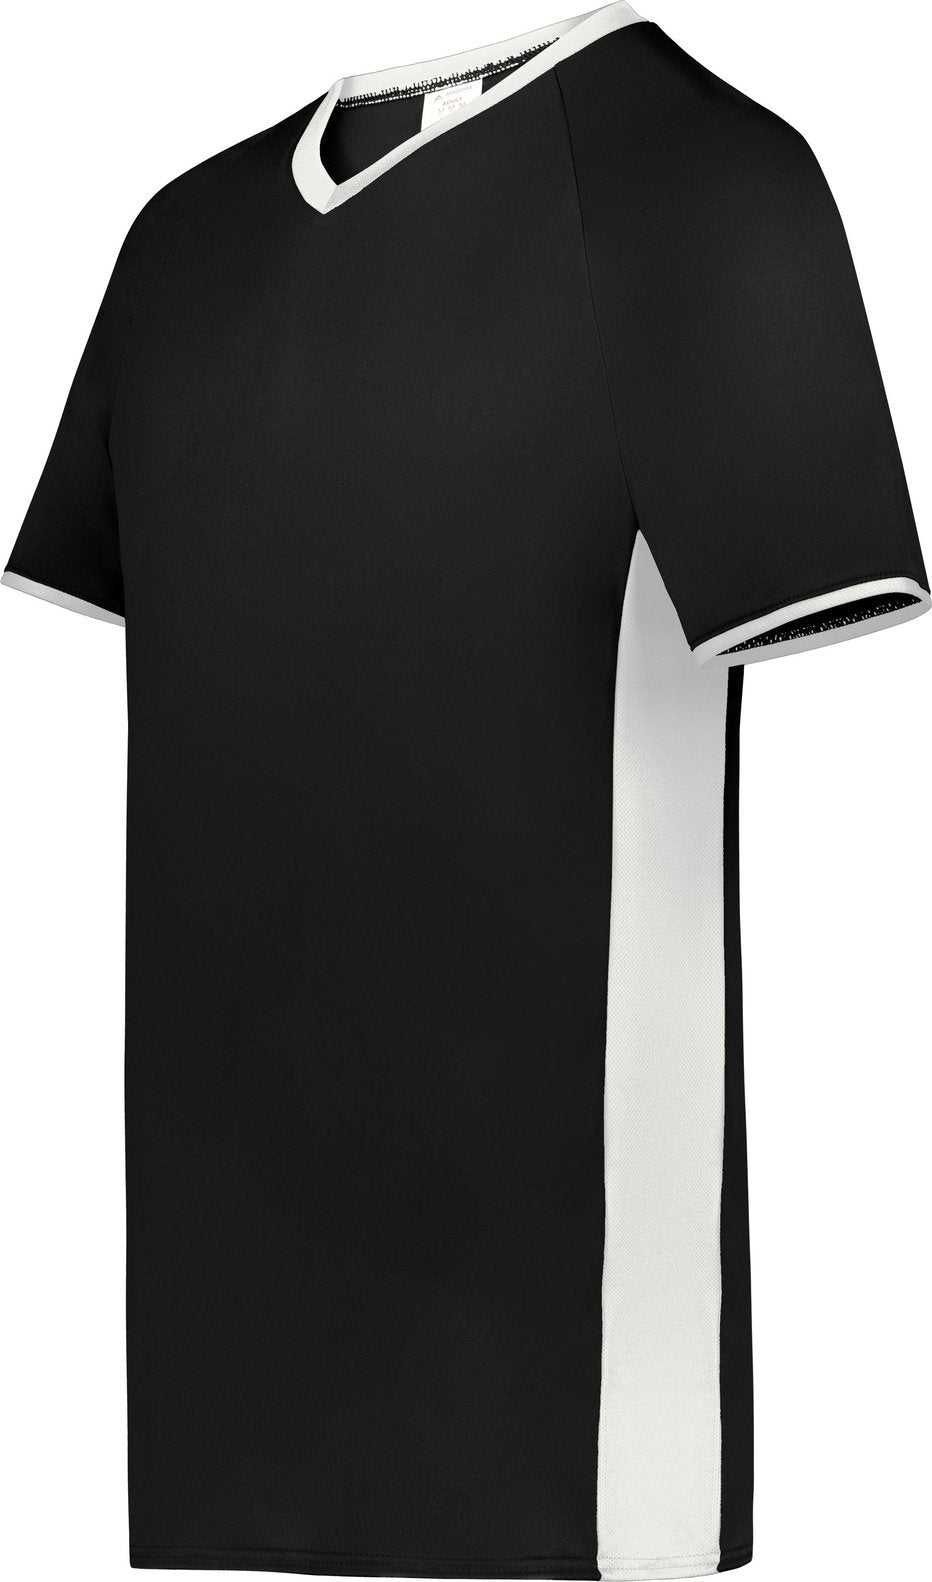 Augusta 6907 Cutter+ V-Neck Jersey - Black White - HIT a Double